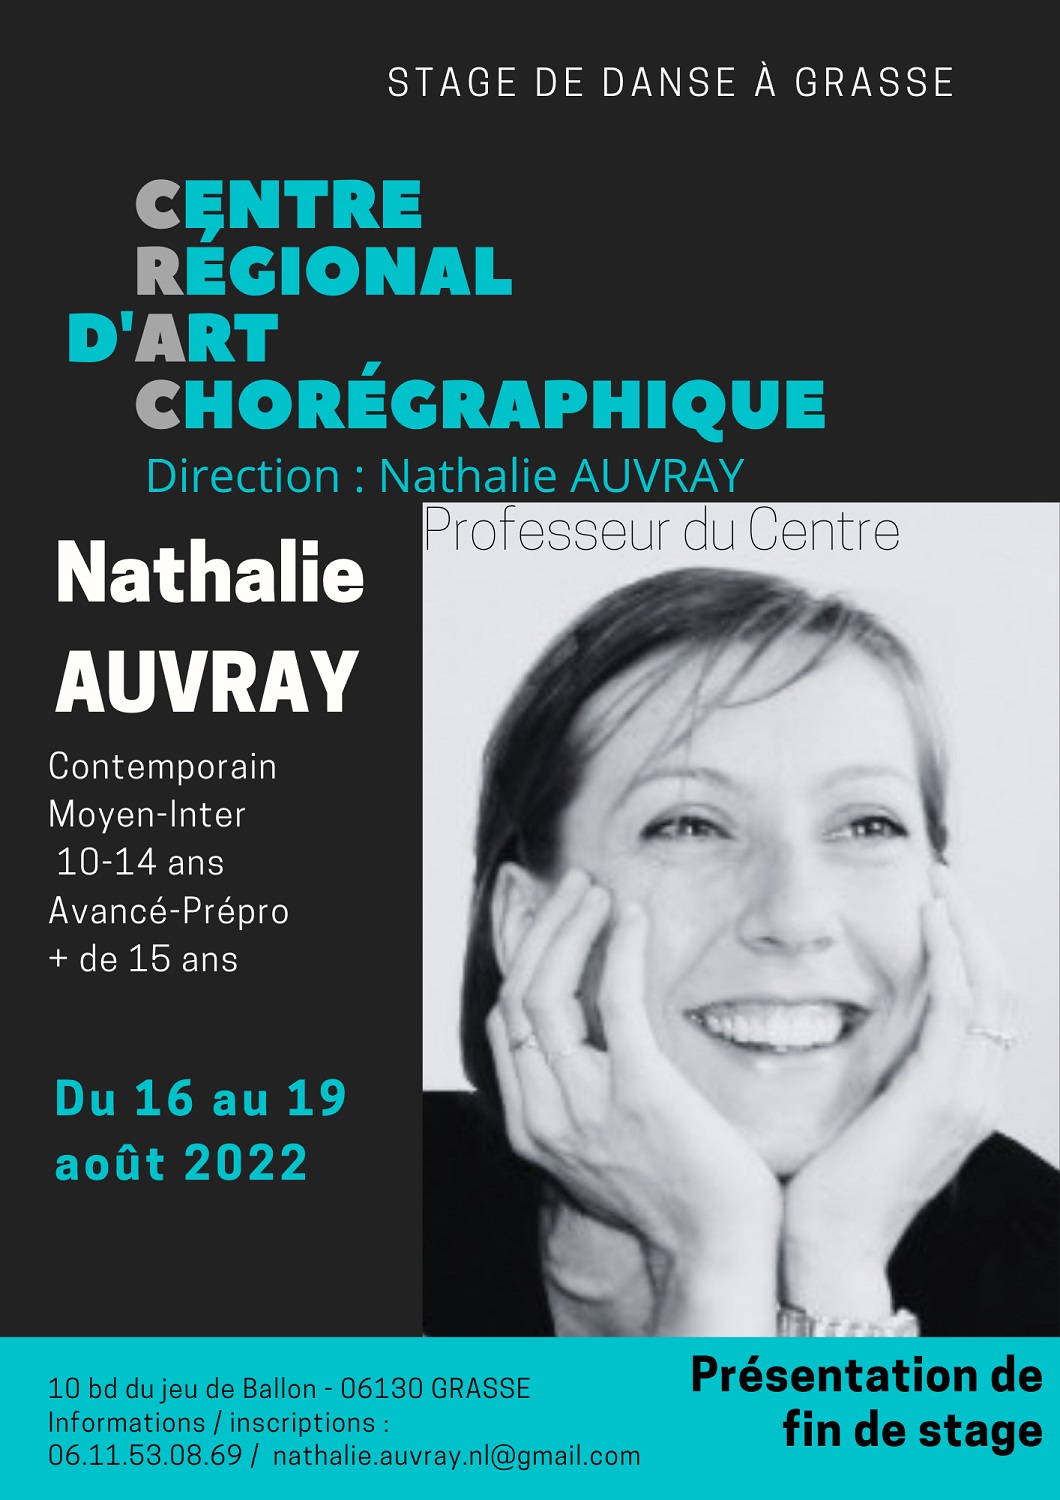 Nathalie Auvray